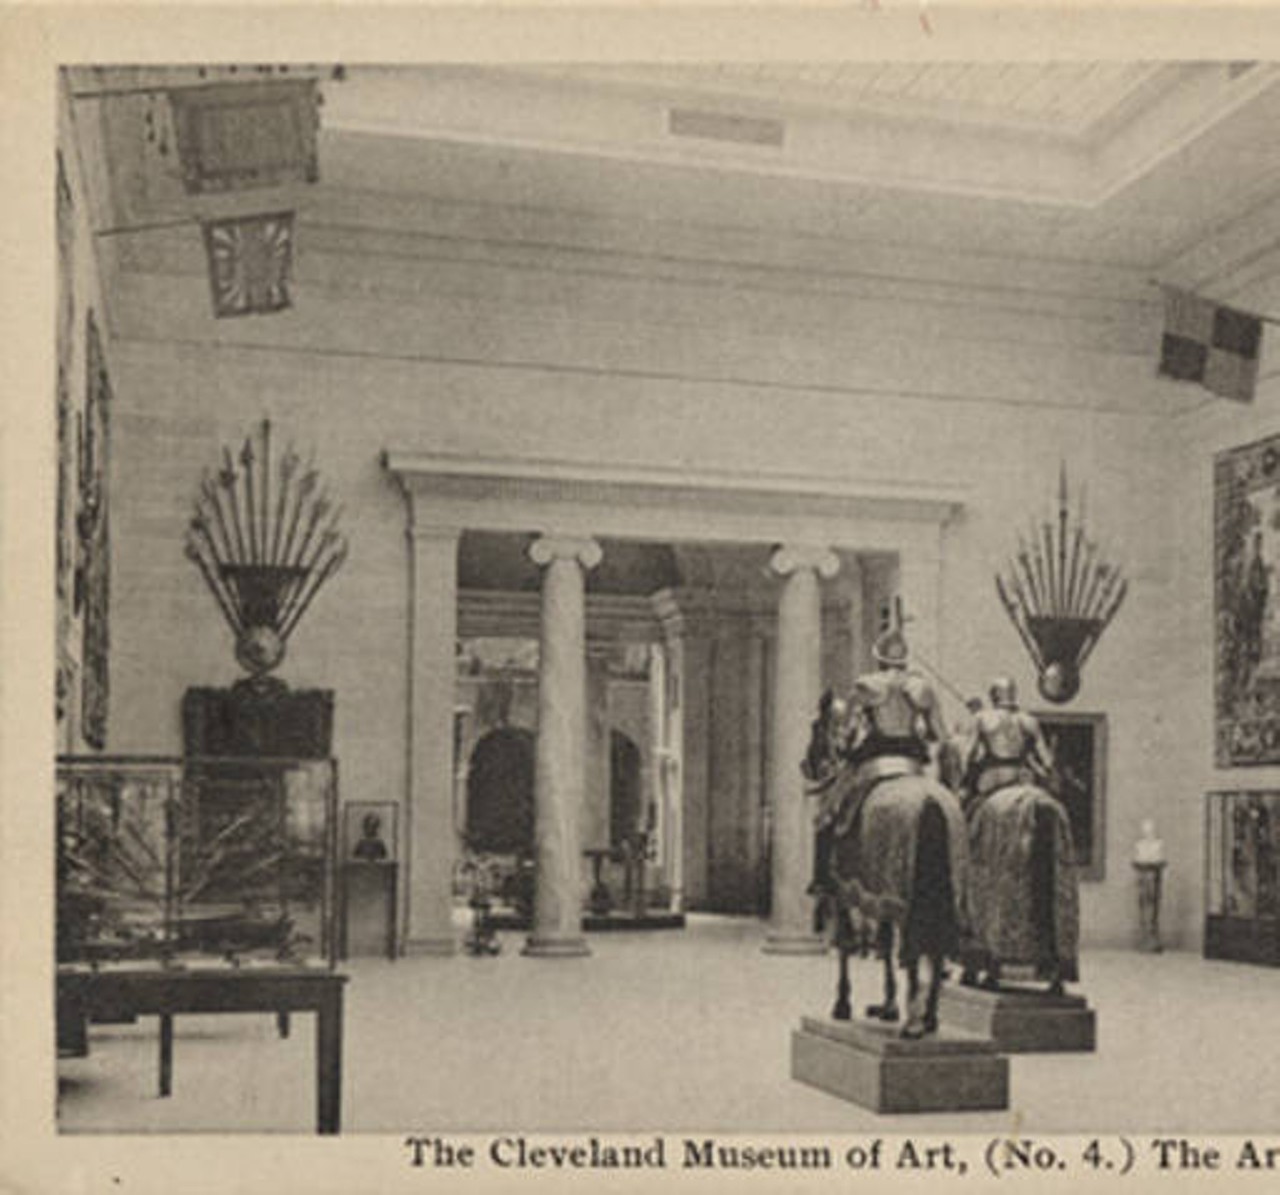 Cleveland Museum of Art, The Armor Court. 1960 - 1990